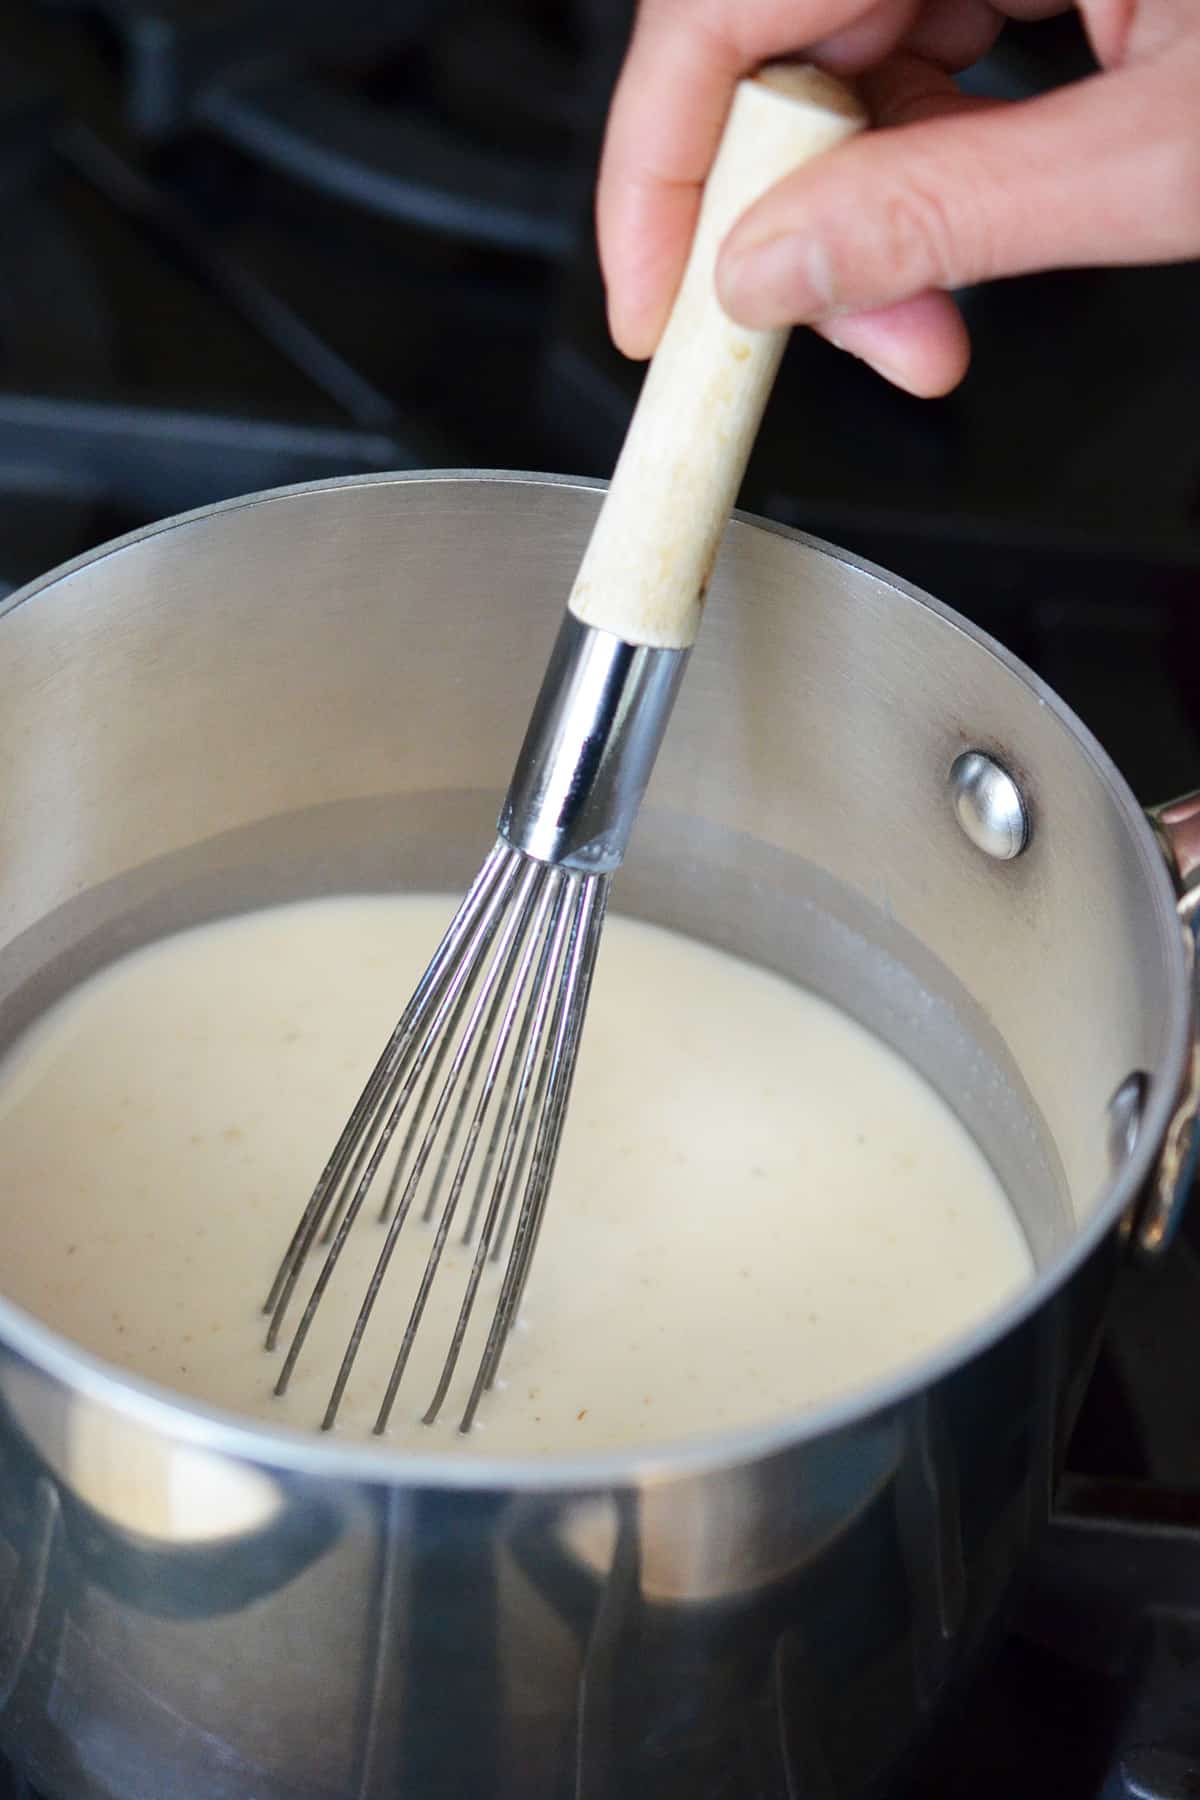 Whisking the Panna Cotta mixture in a small saucepan as it warms up.